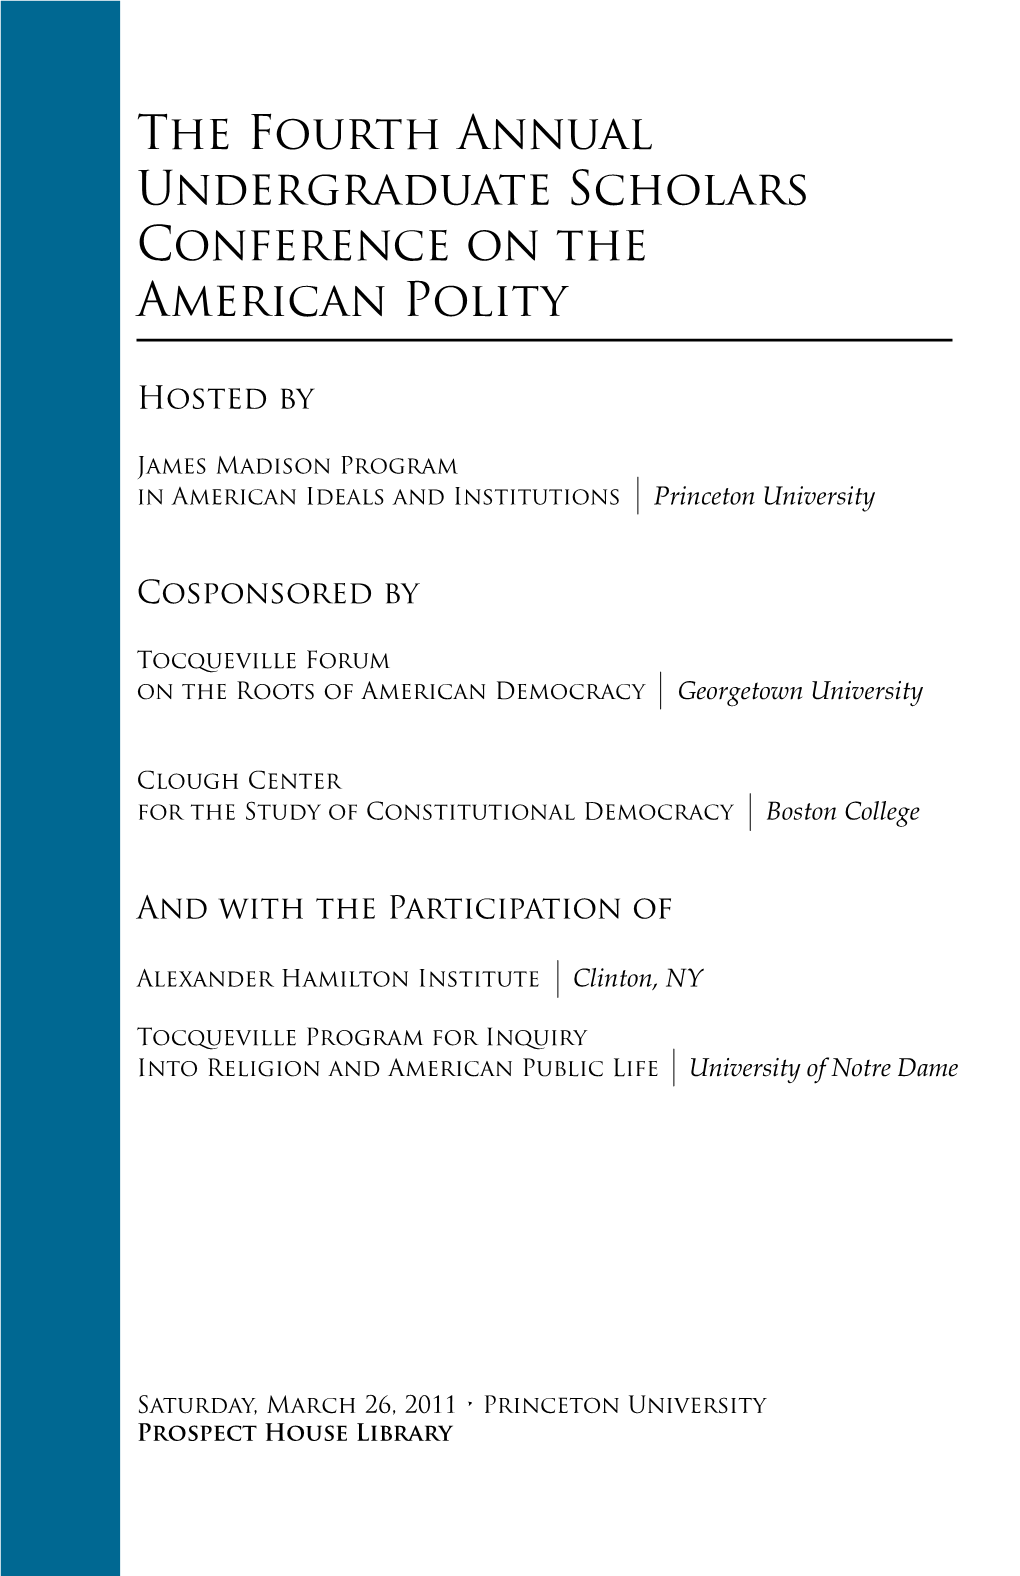 The Fourth Annual Undergraduate Scholars Conference on the American Polity